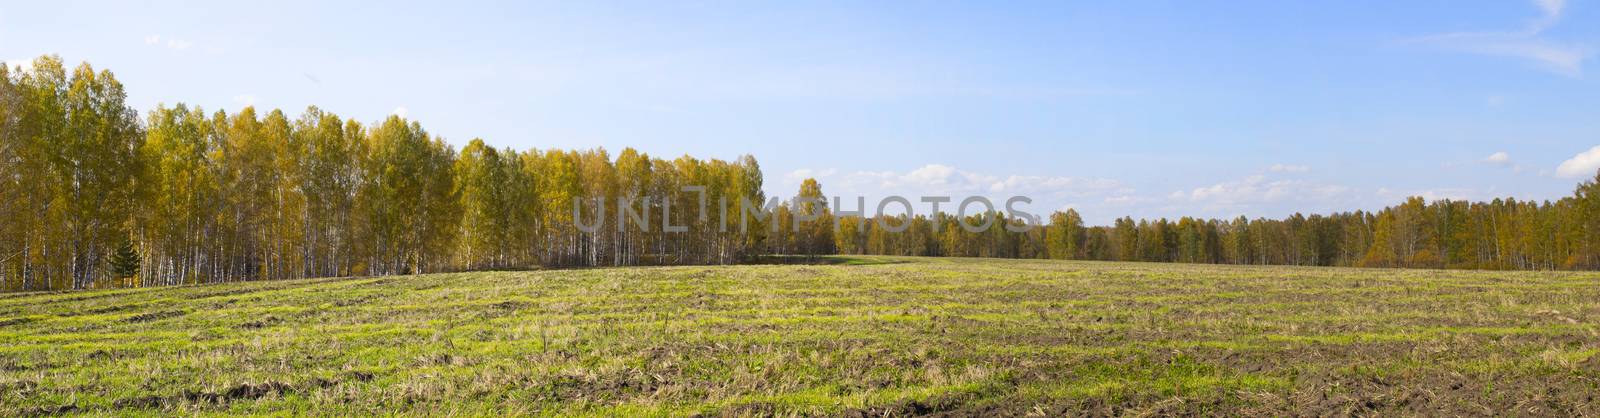 Autumn nature in panorama. Autumn yellow forest and field. Blue sky with clouds over the forest.